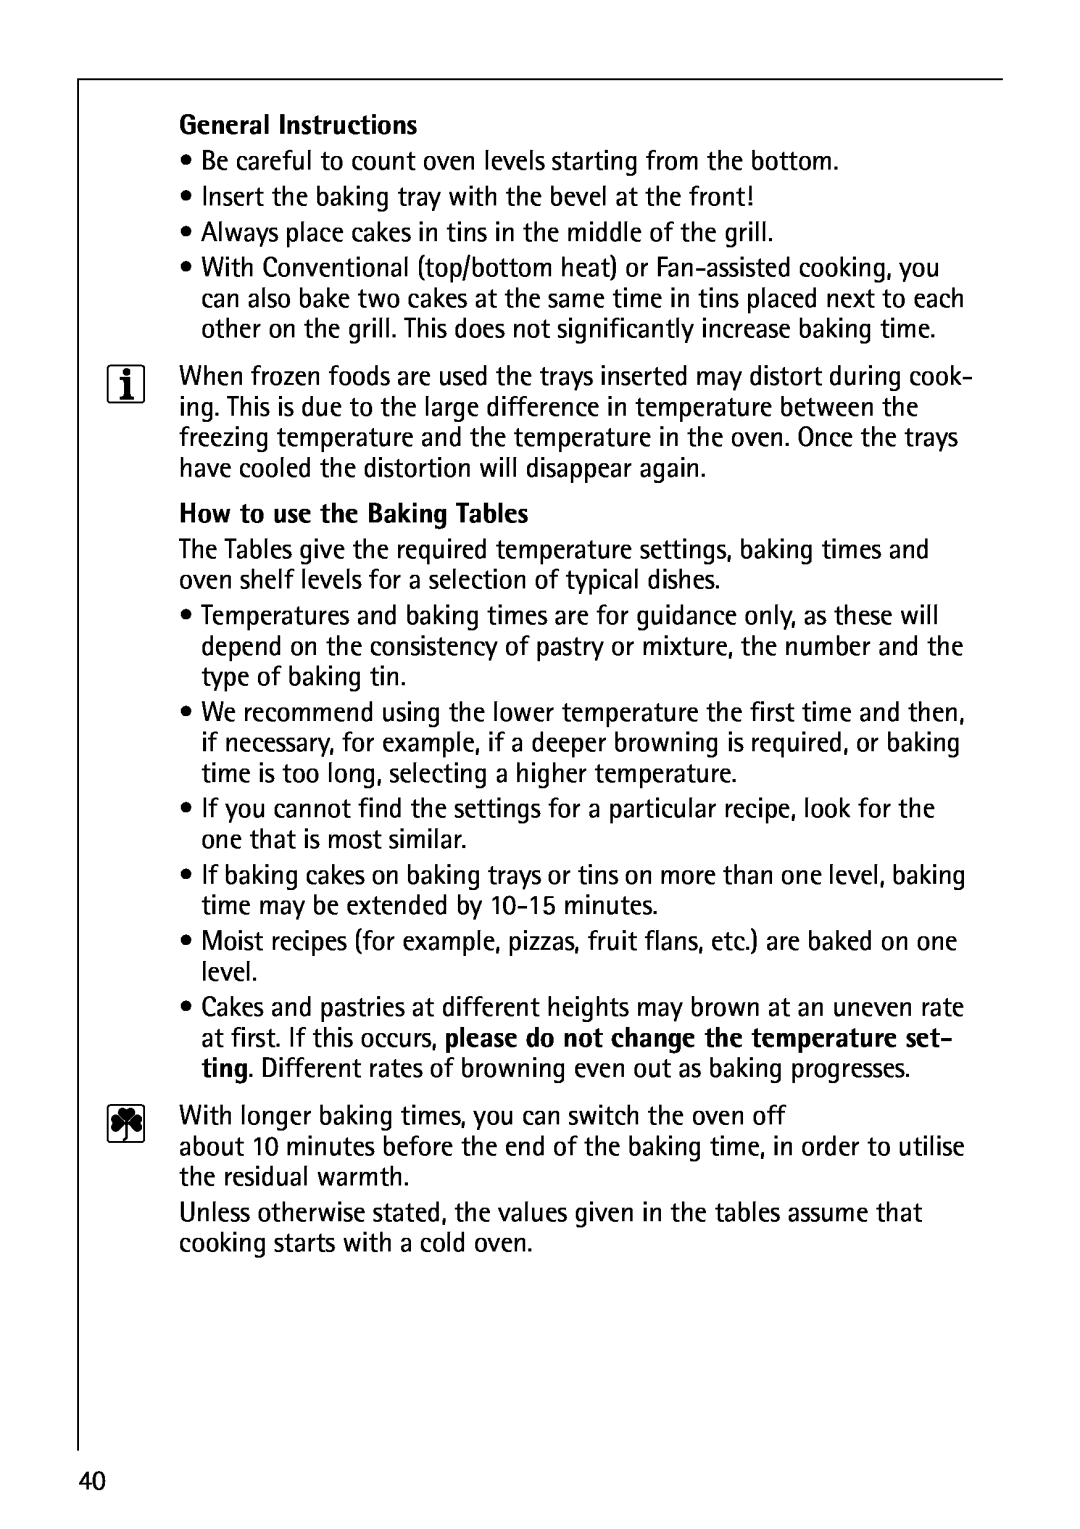 AEG B8920-1 manual General Instructions, How to use the Baking Tables 